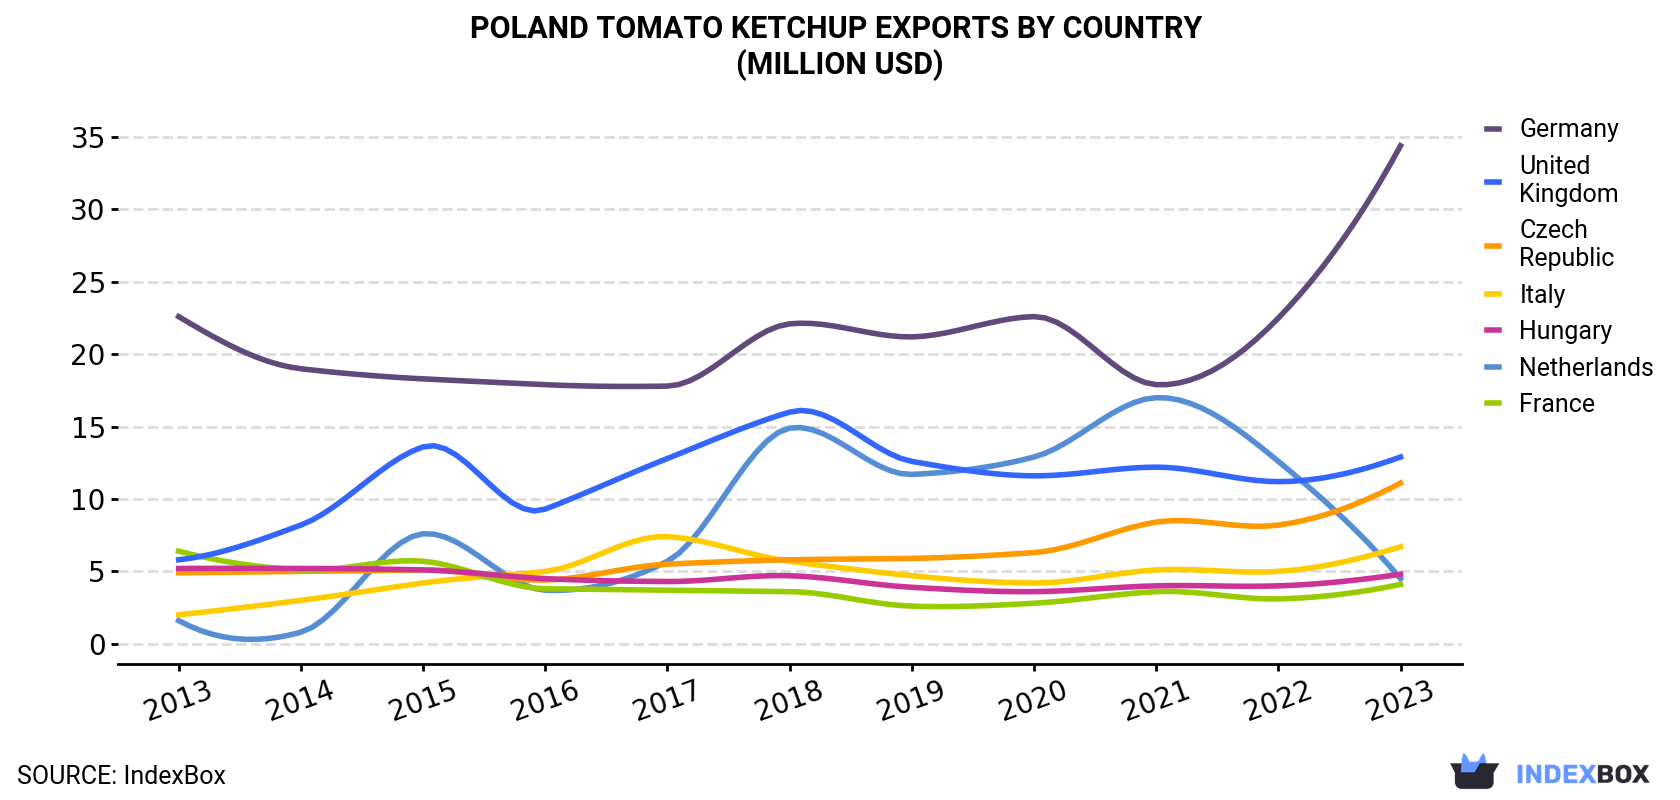 Poland Tomato Ketchup Exports By Country (Million USD)